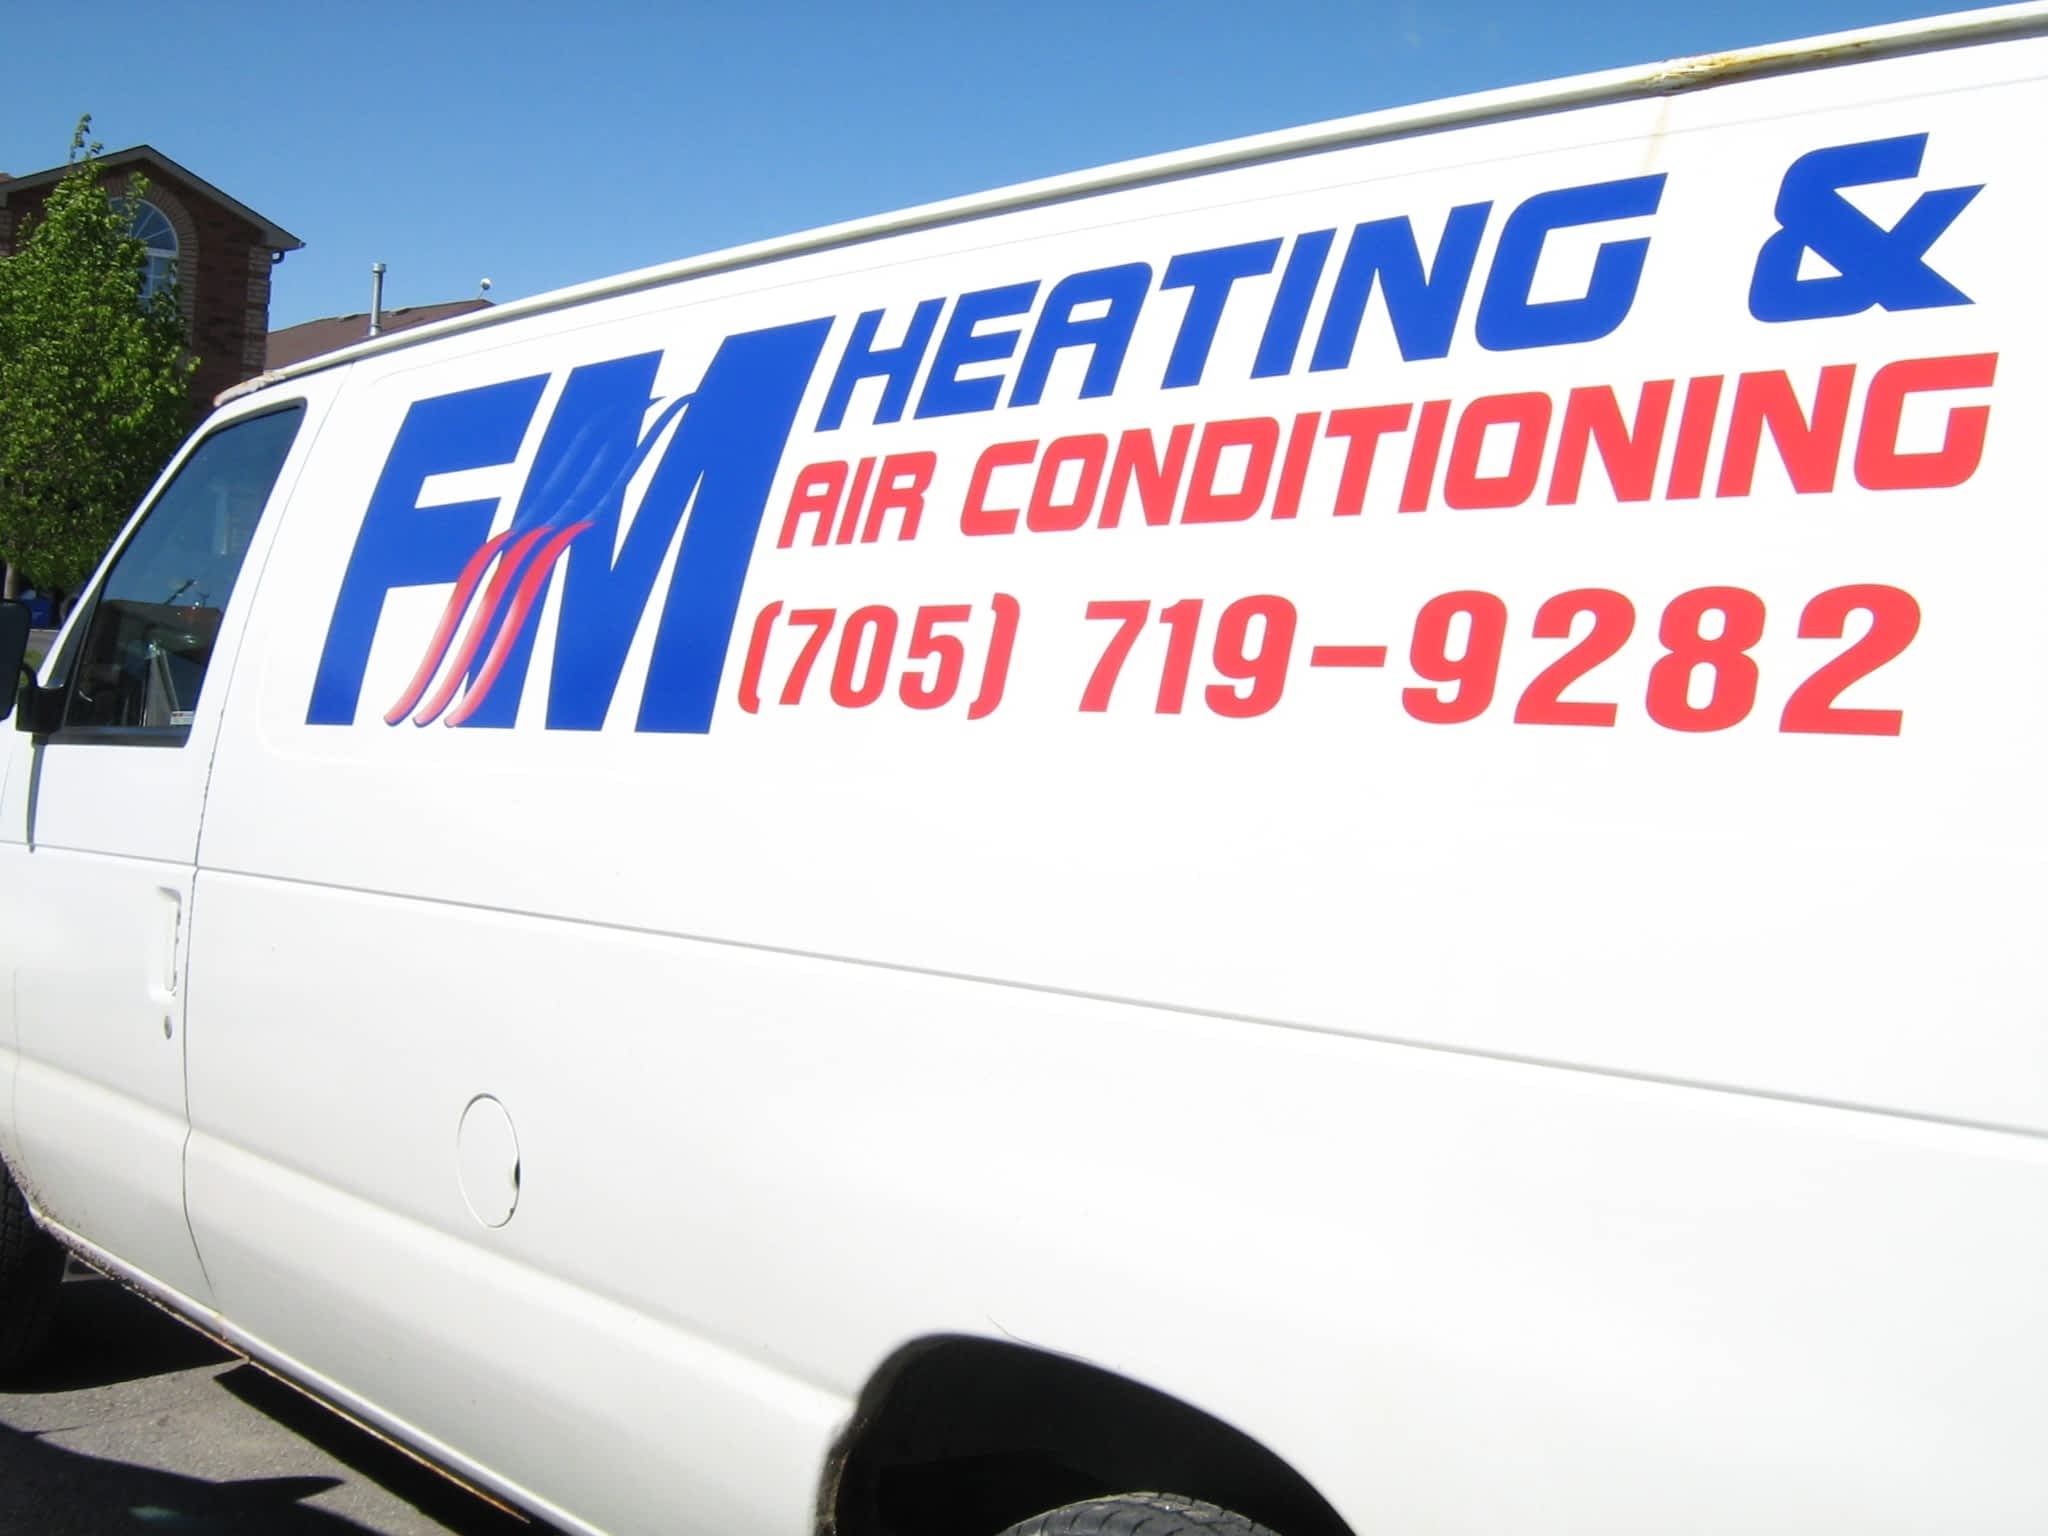 photo Fm Heating & Air Conditioning